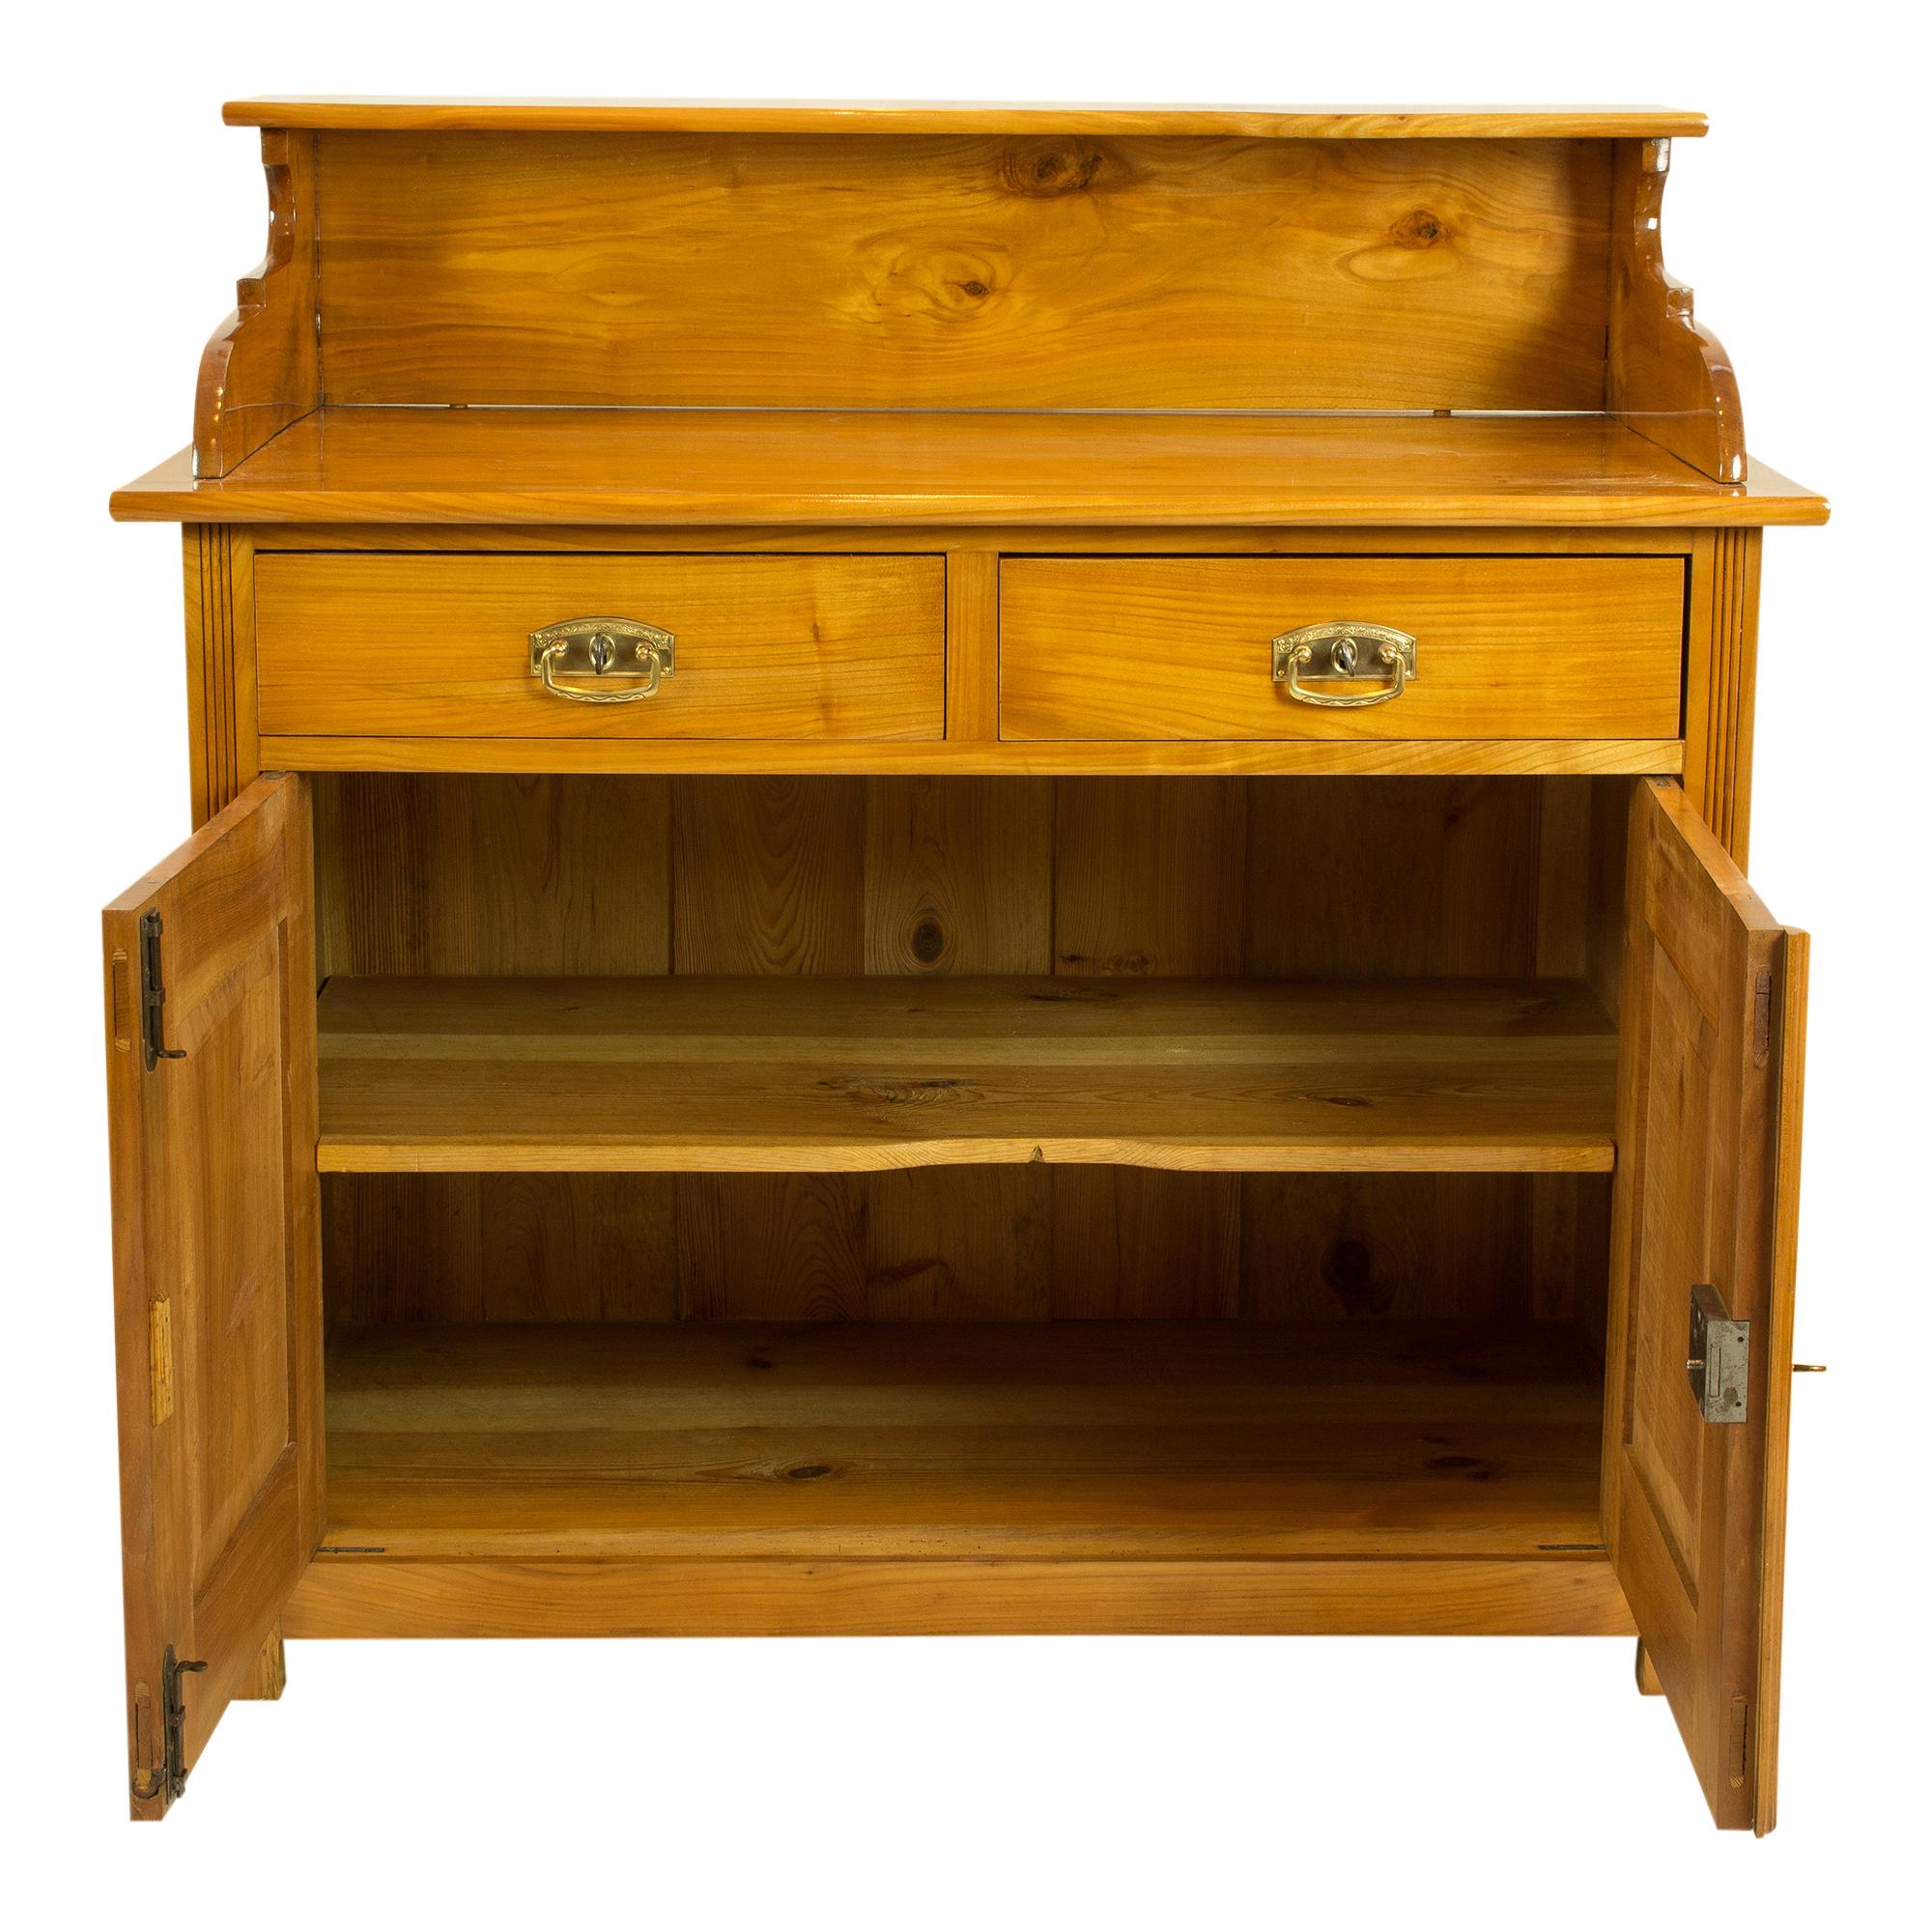 Beautiful simple half cupboard with doors and above it with two drawers as well as an attachment on top. The top is removable. The furniture was made of solid cherry wood and dates from the Art Nouveau period circa 1900.

Measures: Plate height